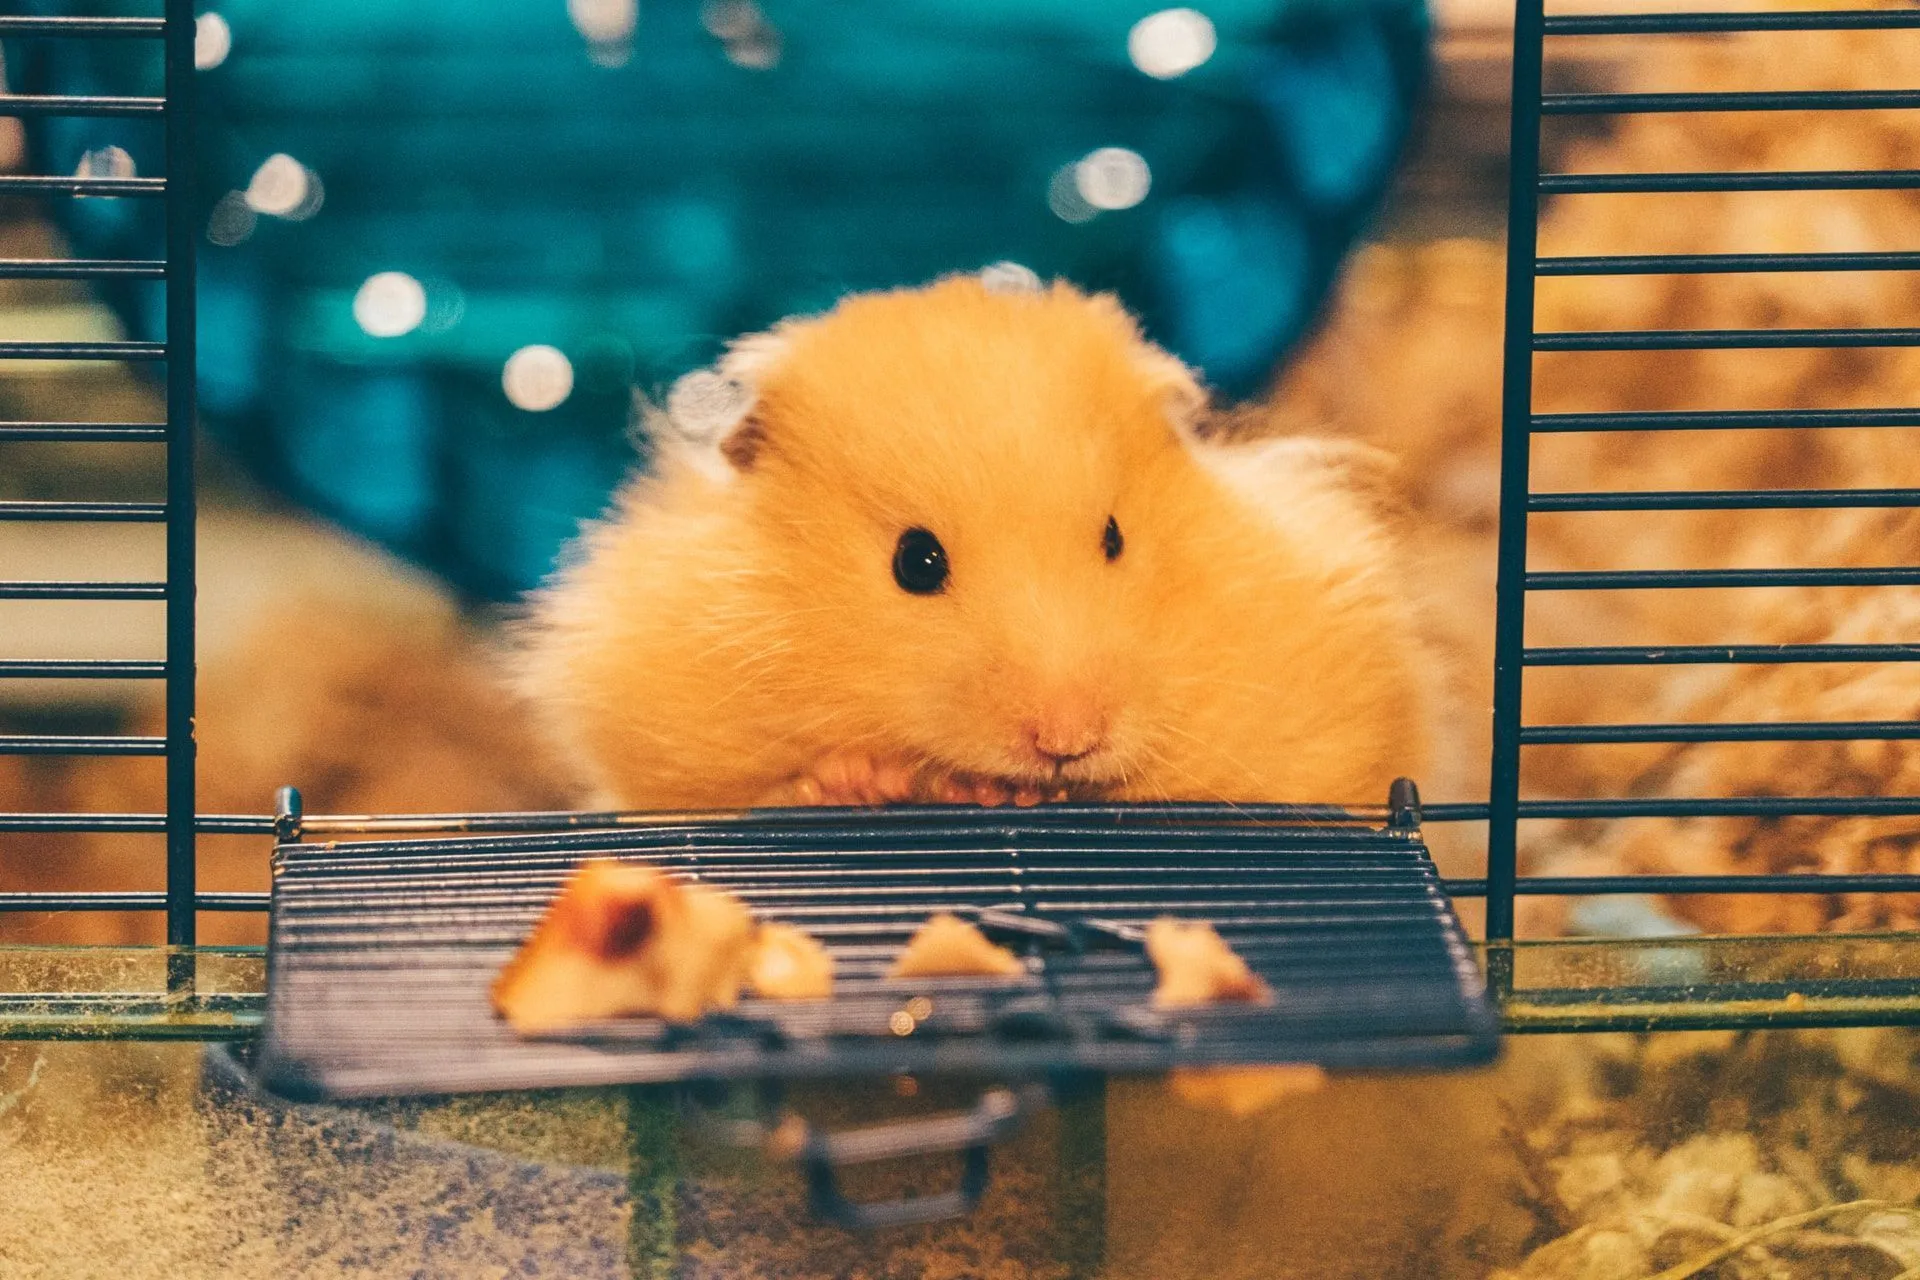 The first thing to do on National Hamster Day is to spend some quality time with your pet.